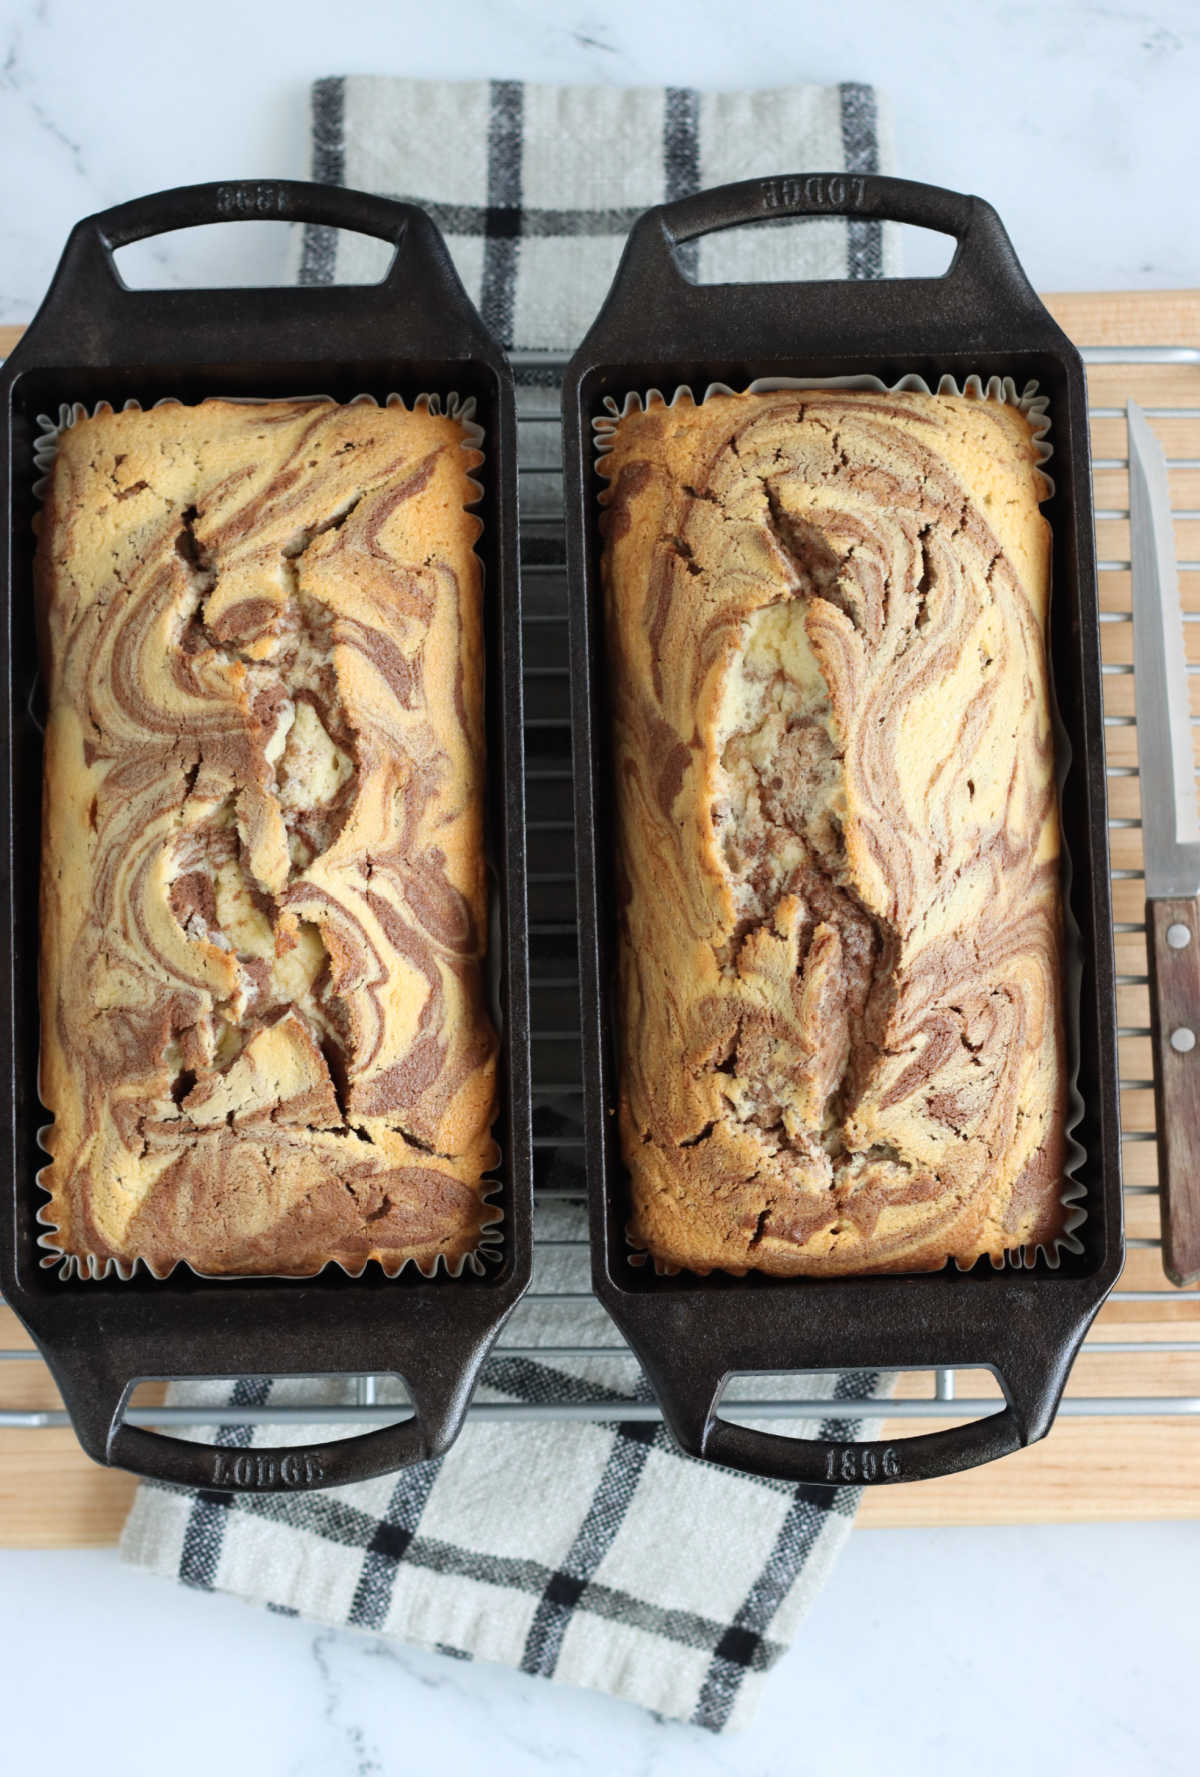 Marble cake in two cast iron loaf pans on wooden cutting board.